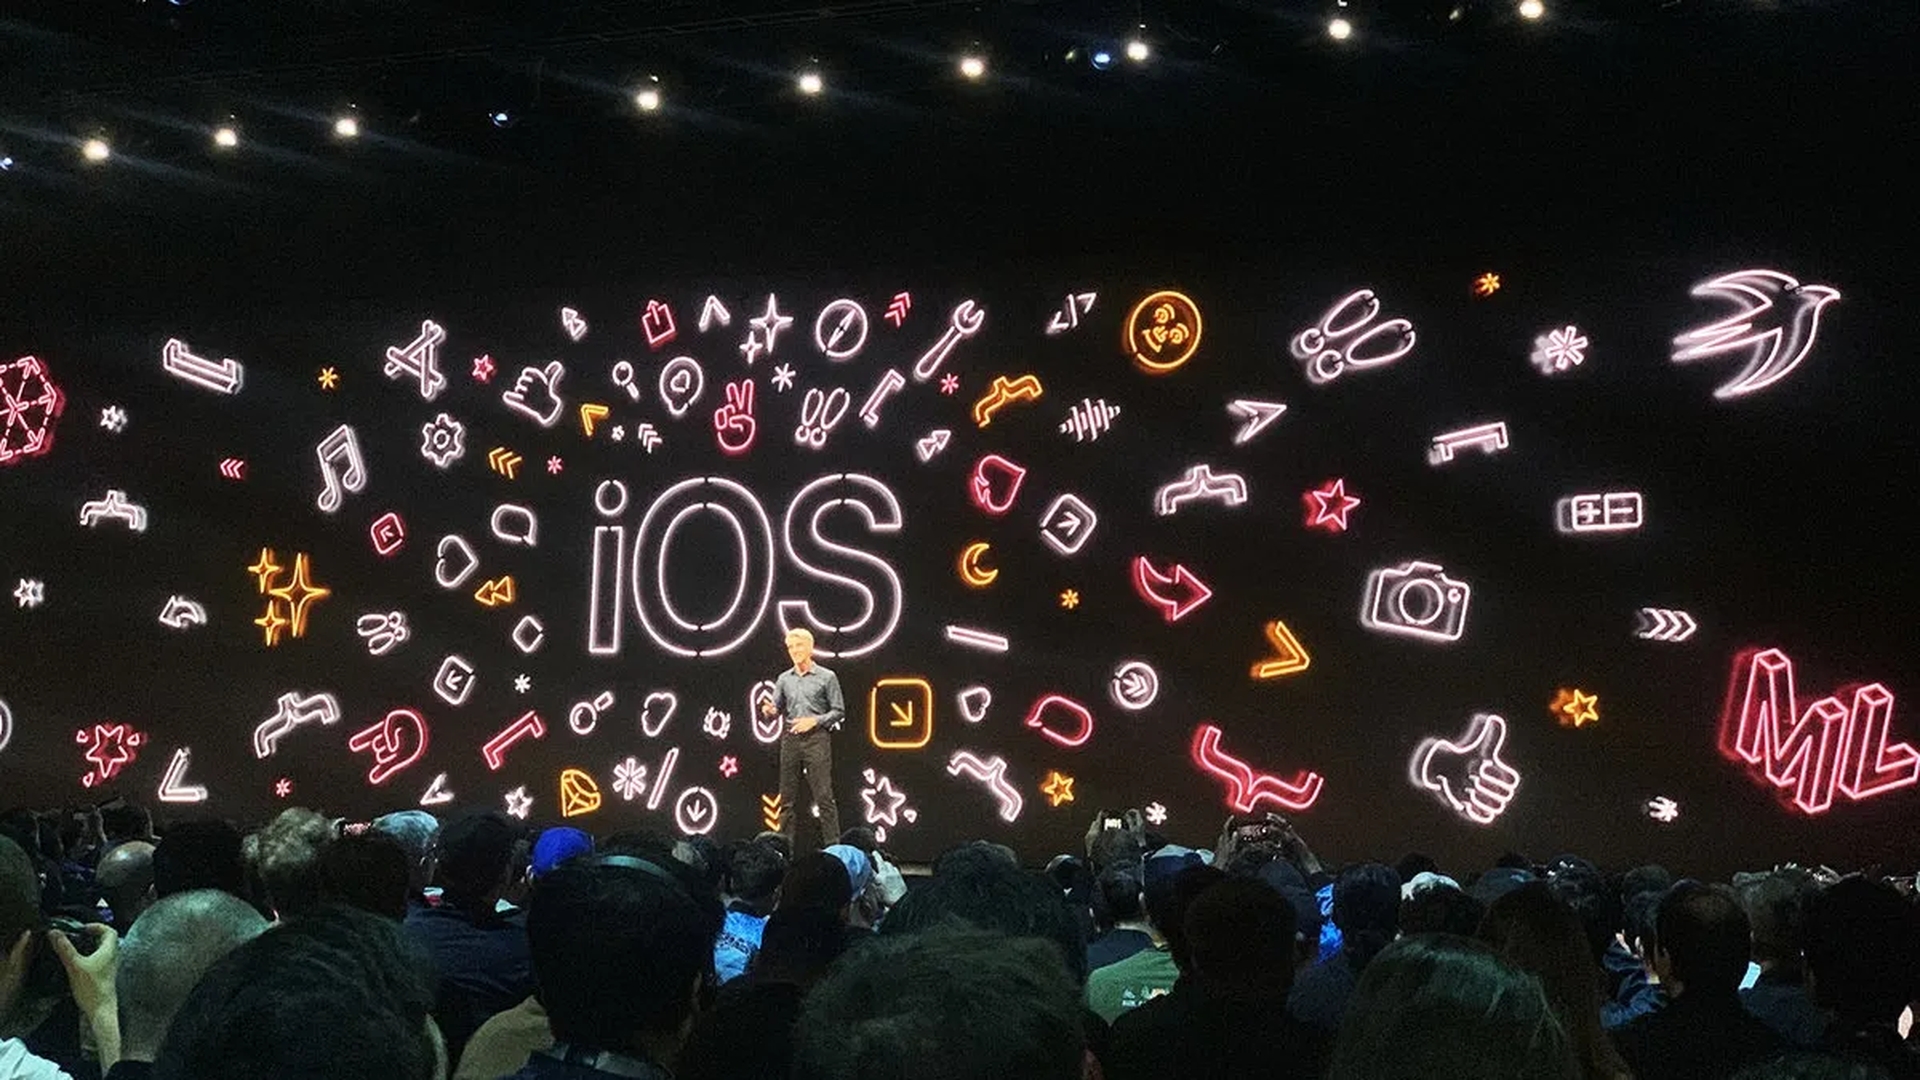 Today, we will be covering when is WWDC 2022 keynote and how to watch it, so you don't miss the annual event that Apple unveils new features for their devices.